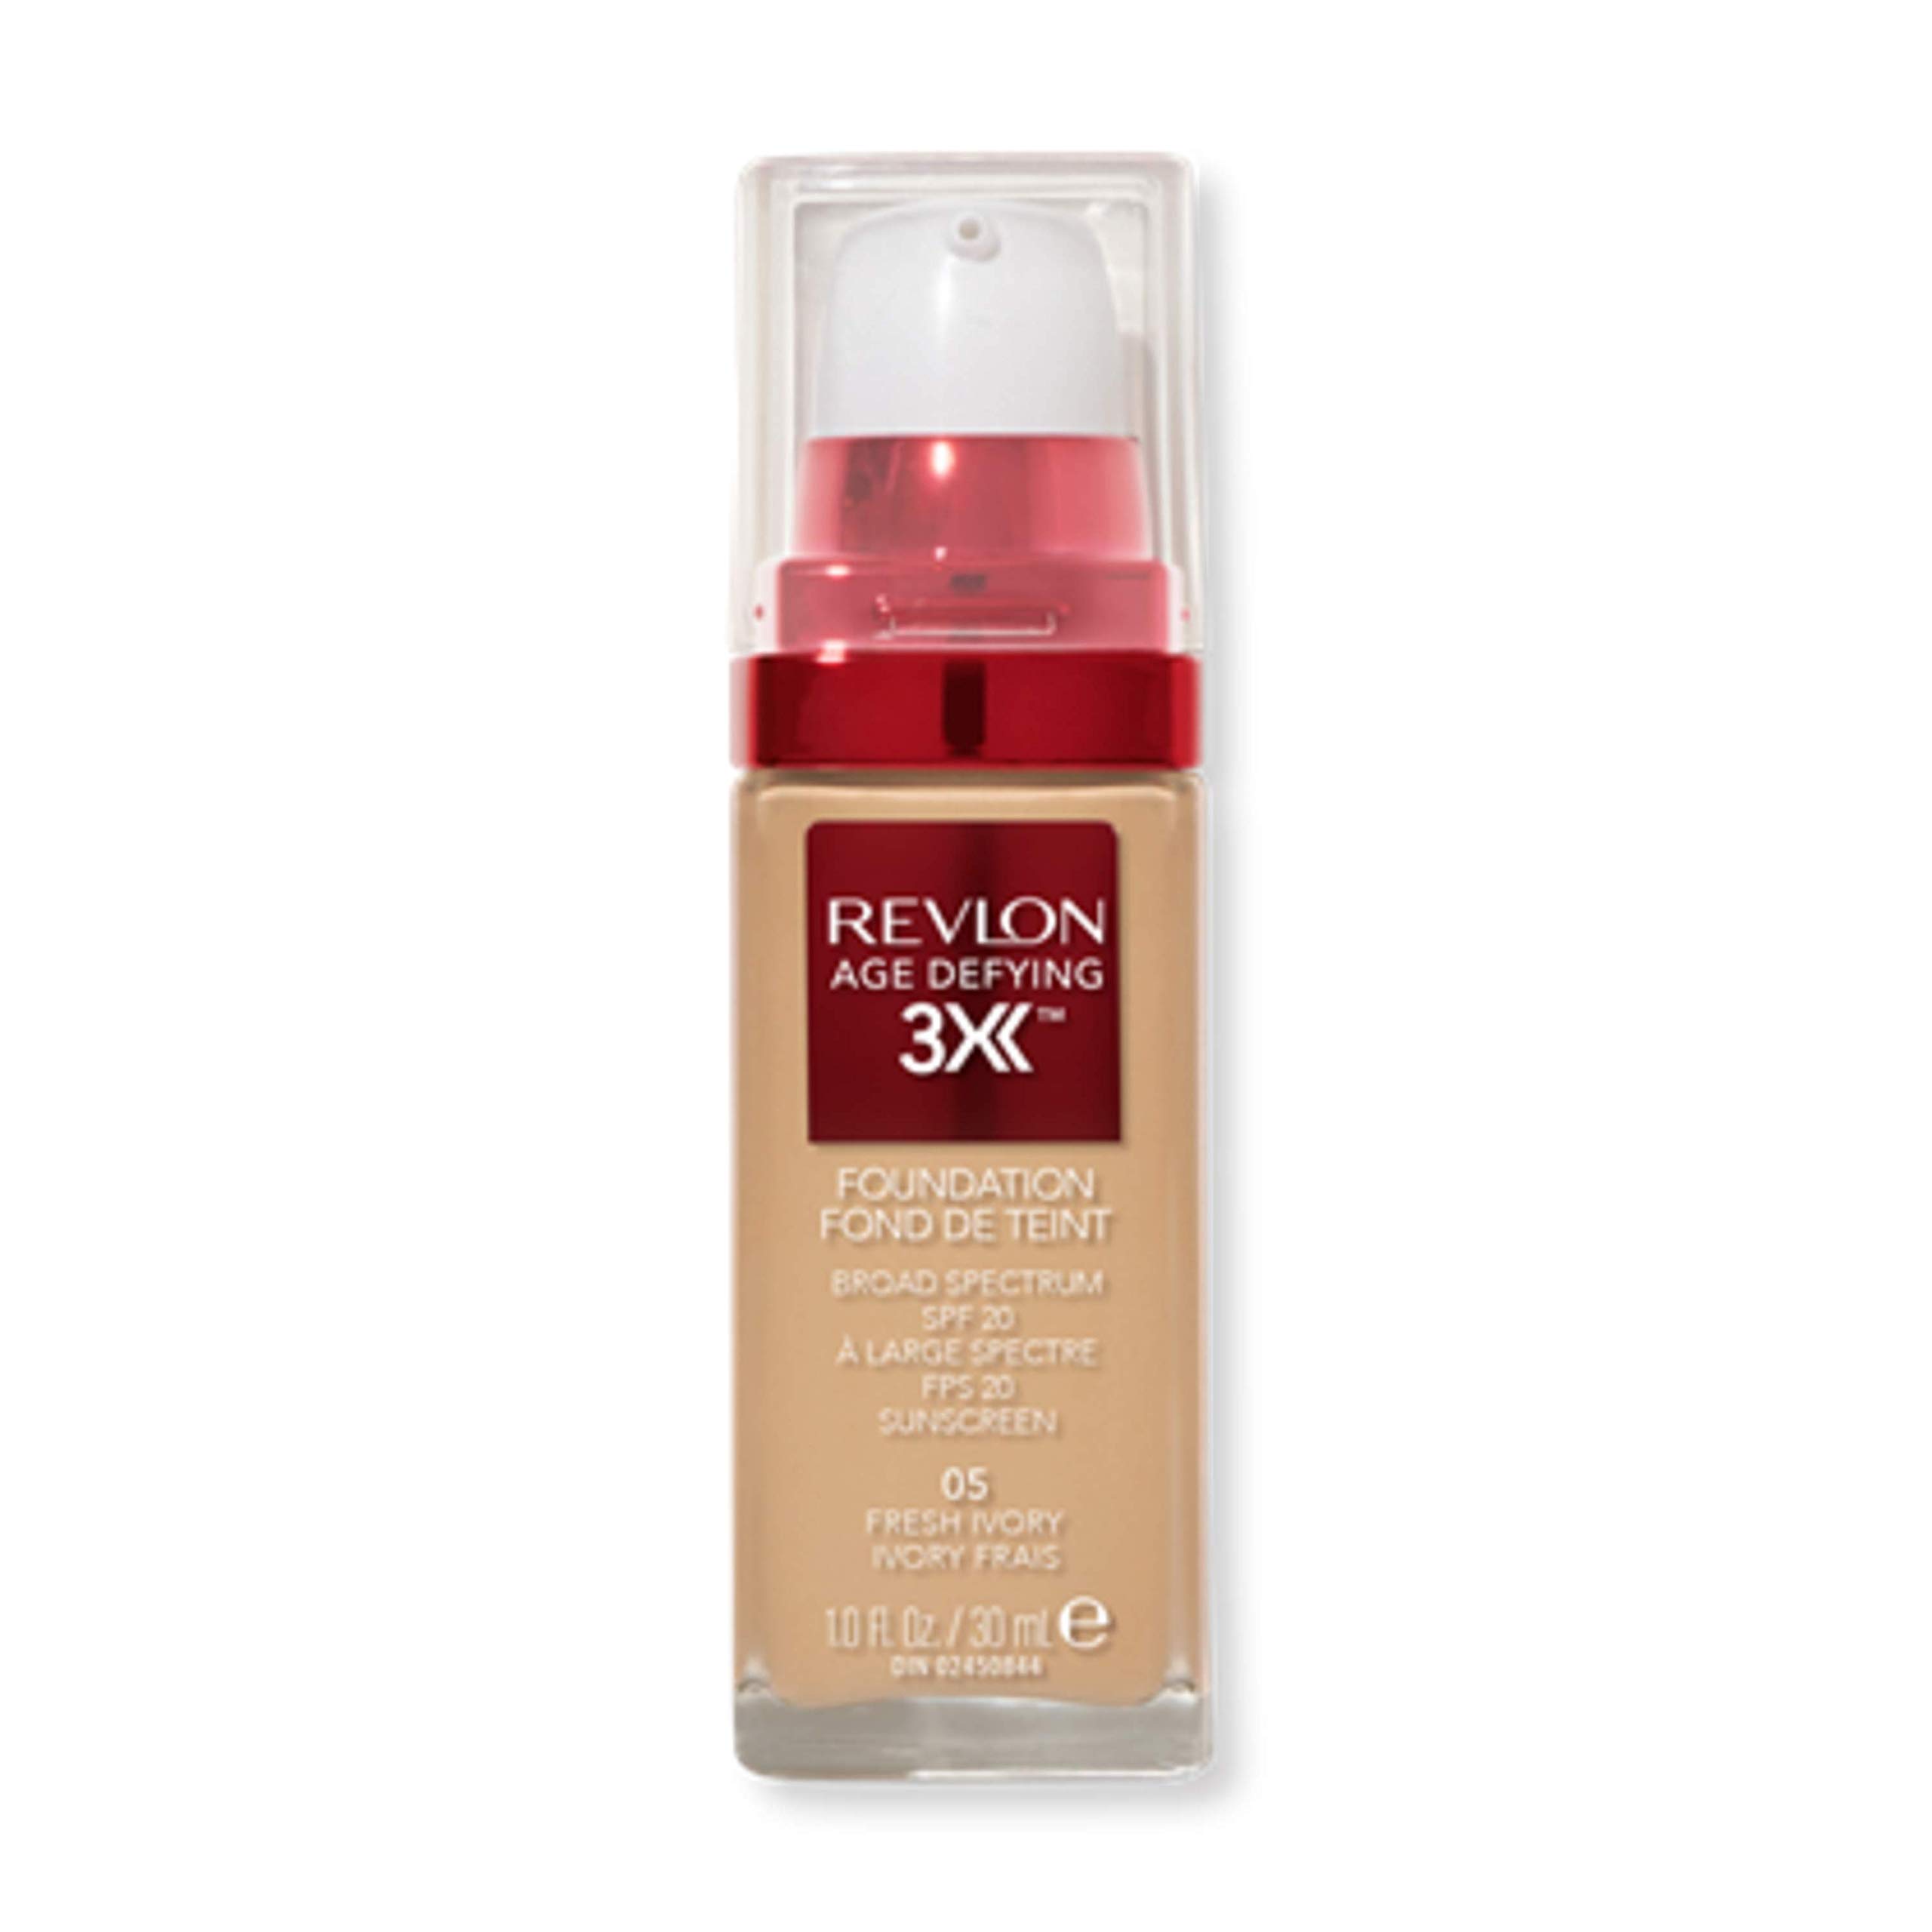 Revlon Liquid Foundation, Age Defying 3XFace Makeup, Anti-Aging and Firming Formula, SPF 30, Longwear Medium Buildable Coverage with Natural Finish, 005 Fresh Ivory, 1 Fl Oz